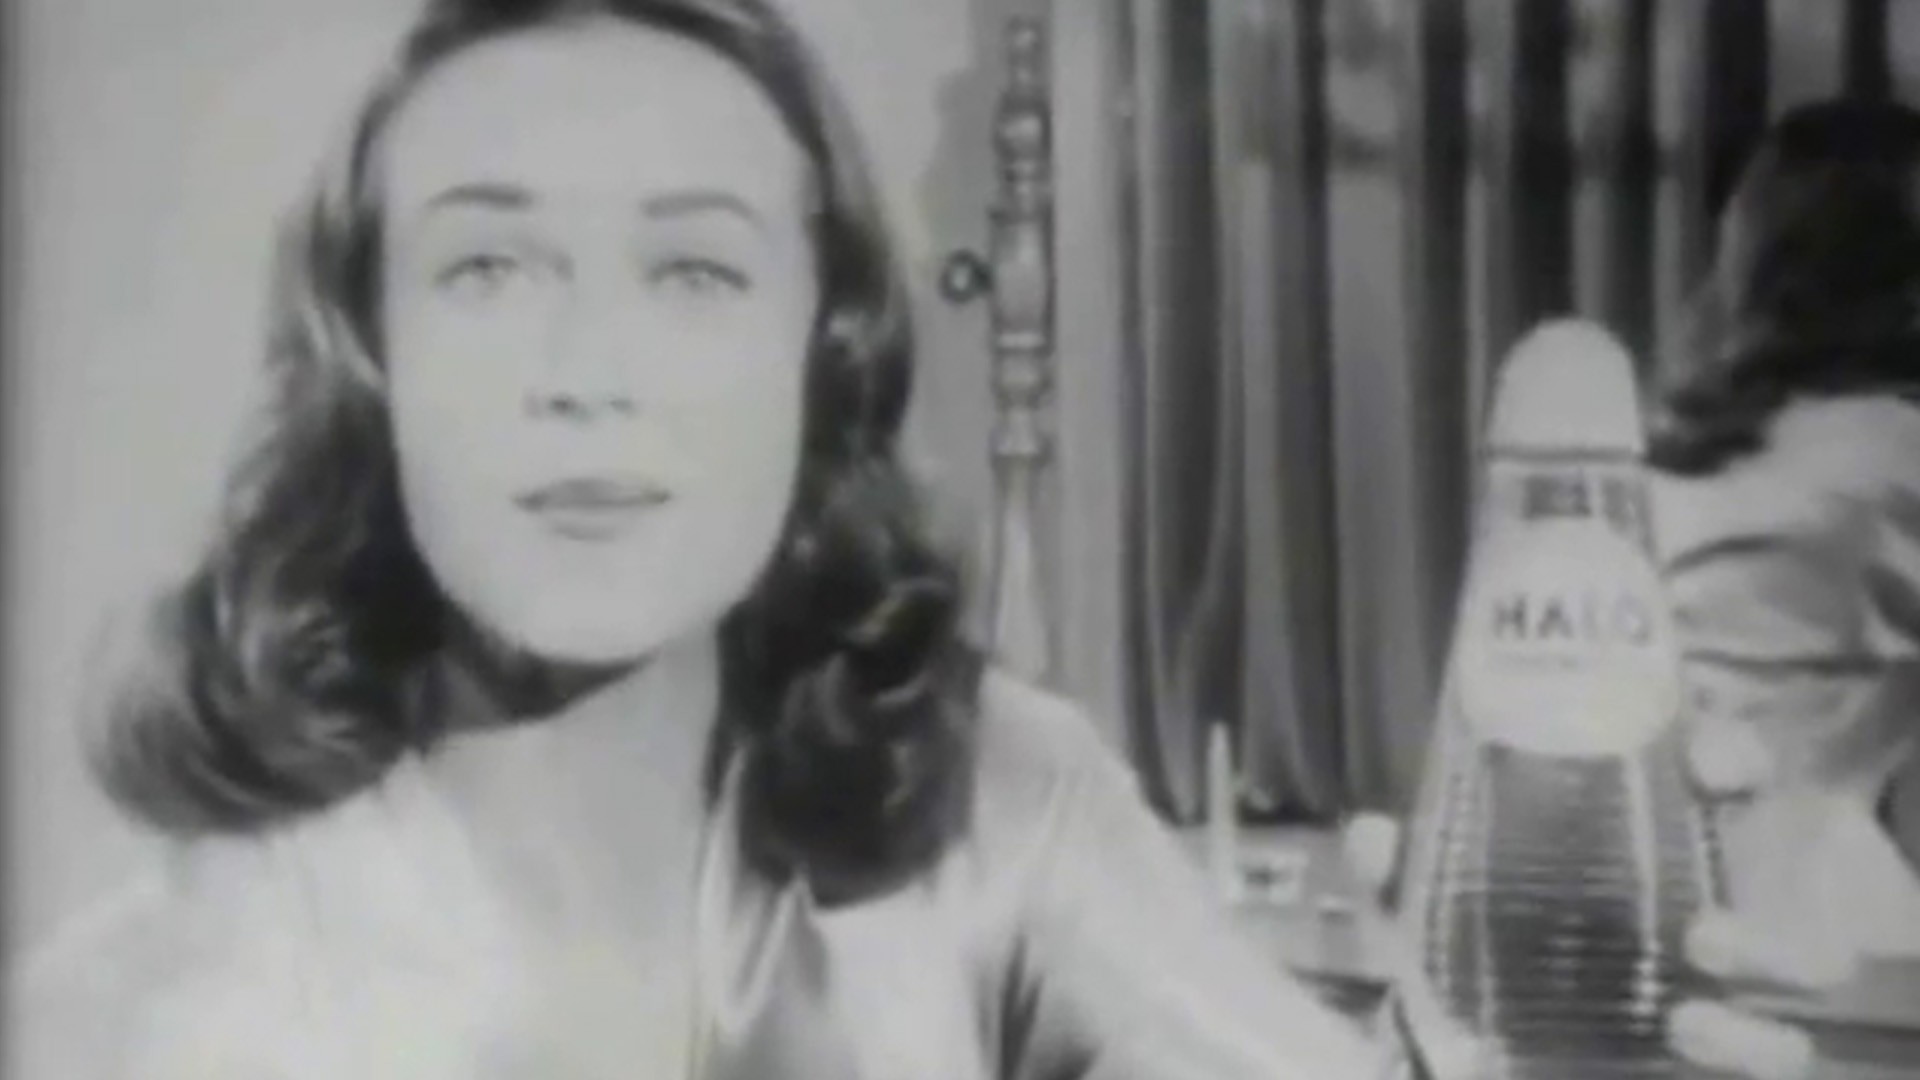 Black and white still image from a Halo Shampoo TV ad. Well-coiffed woman holding a bottle of Halo Shampoo.